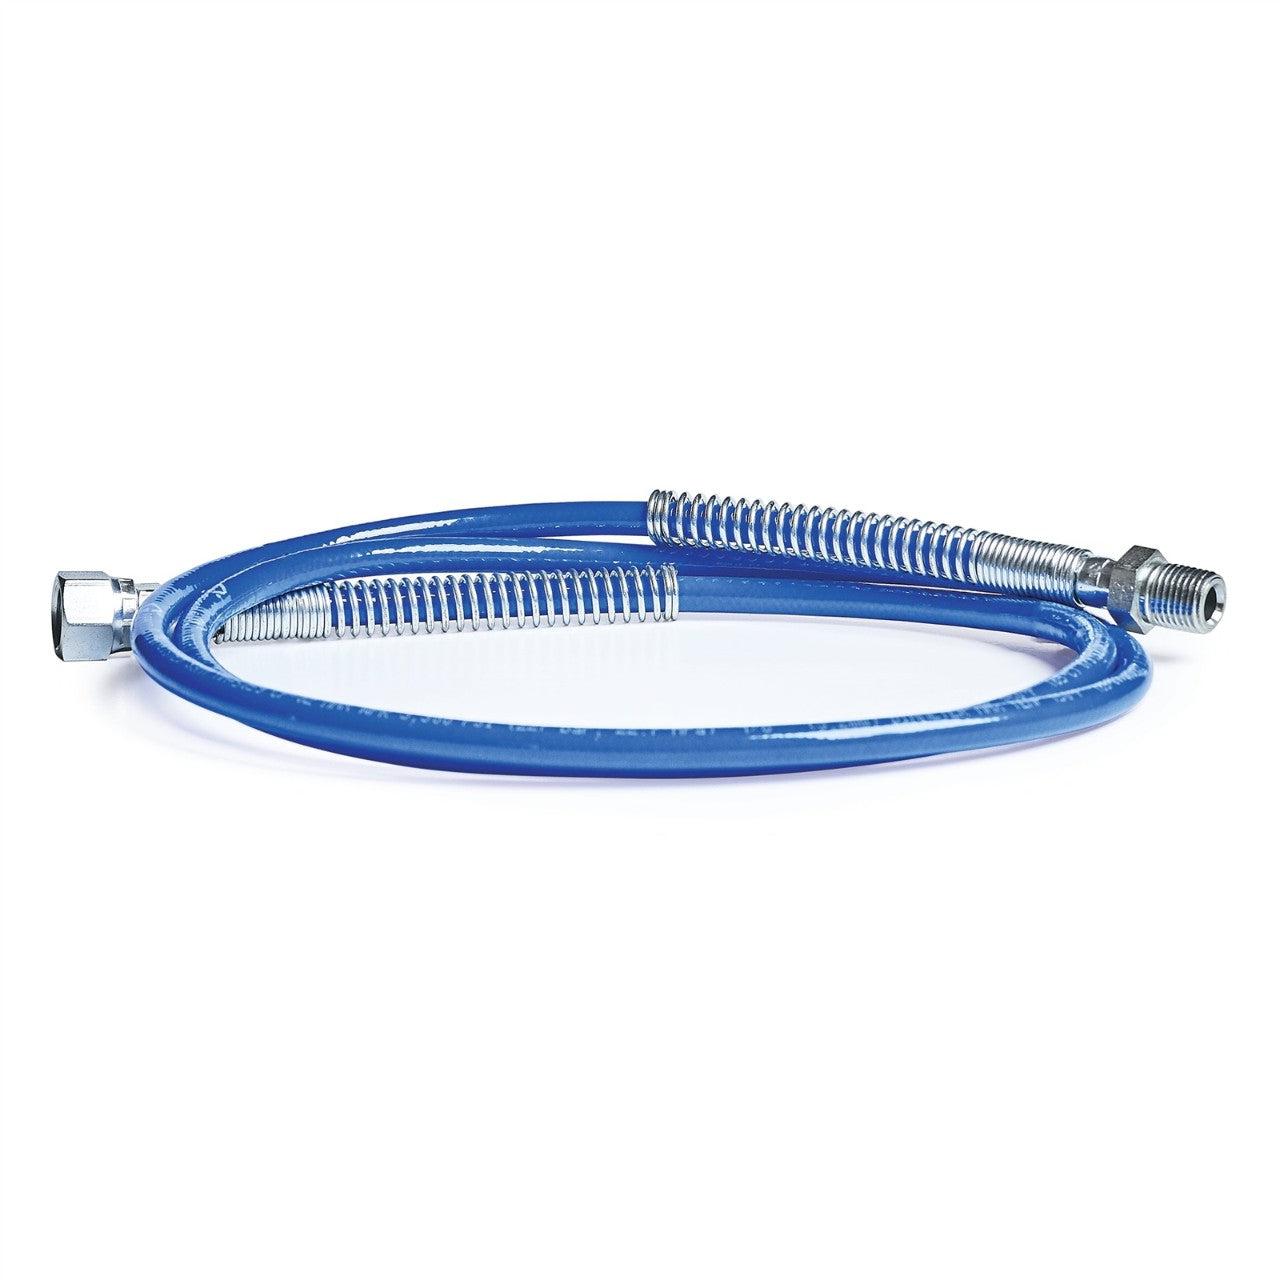 BlueMax II Airless Whip Hose, 1/8 in x 4.5 ft